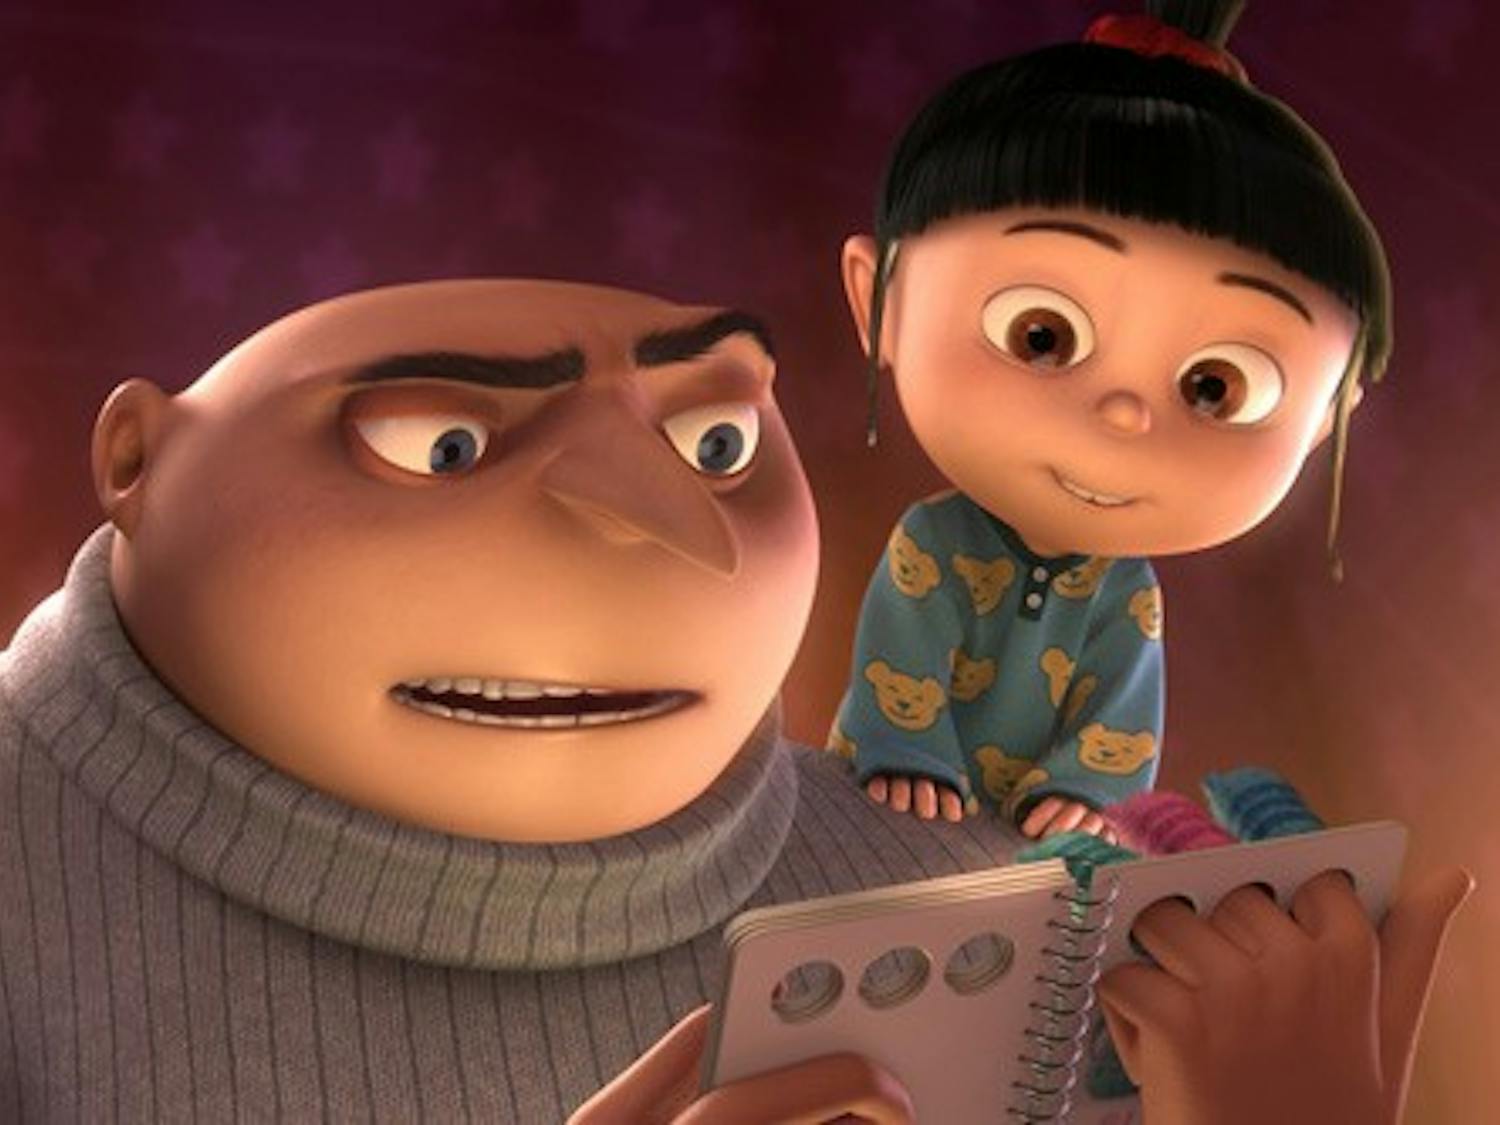 Despicable Me"" anything but despicable